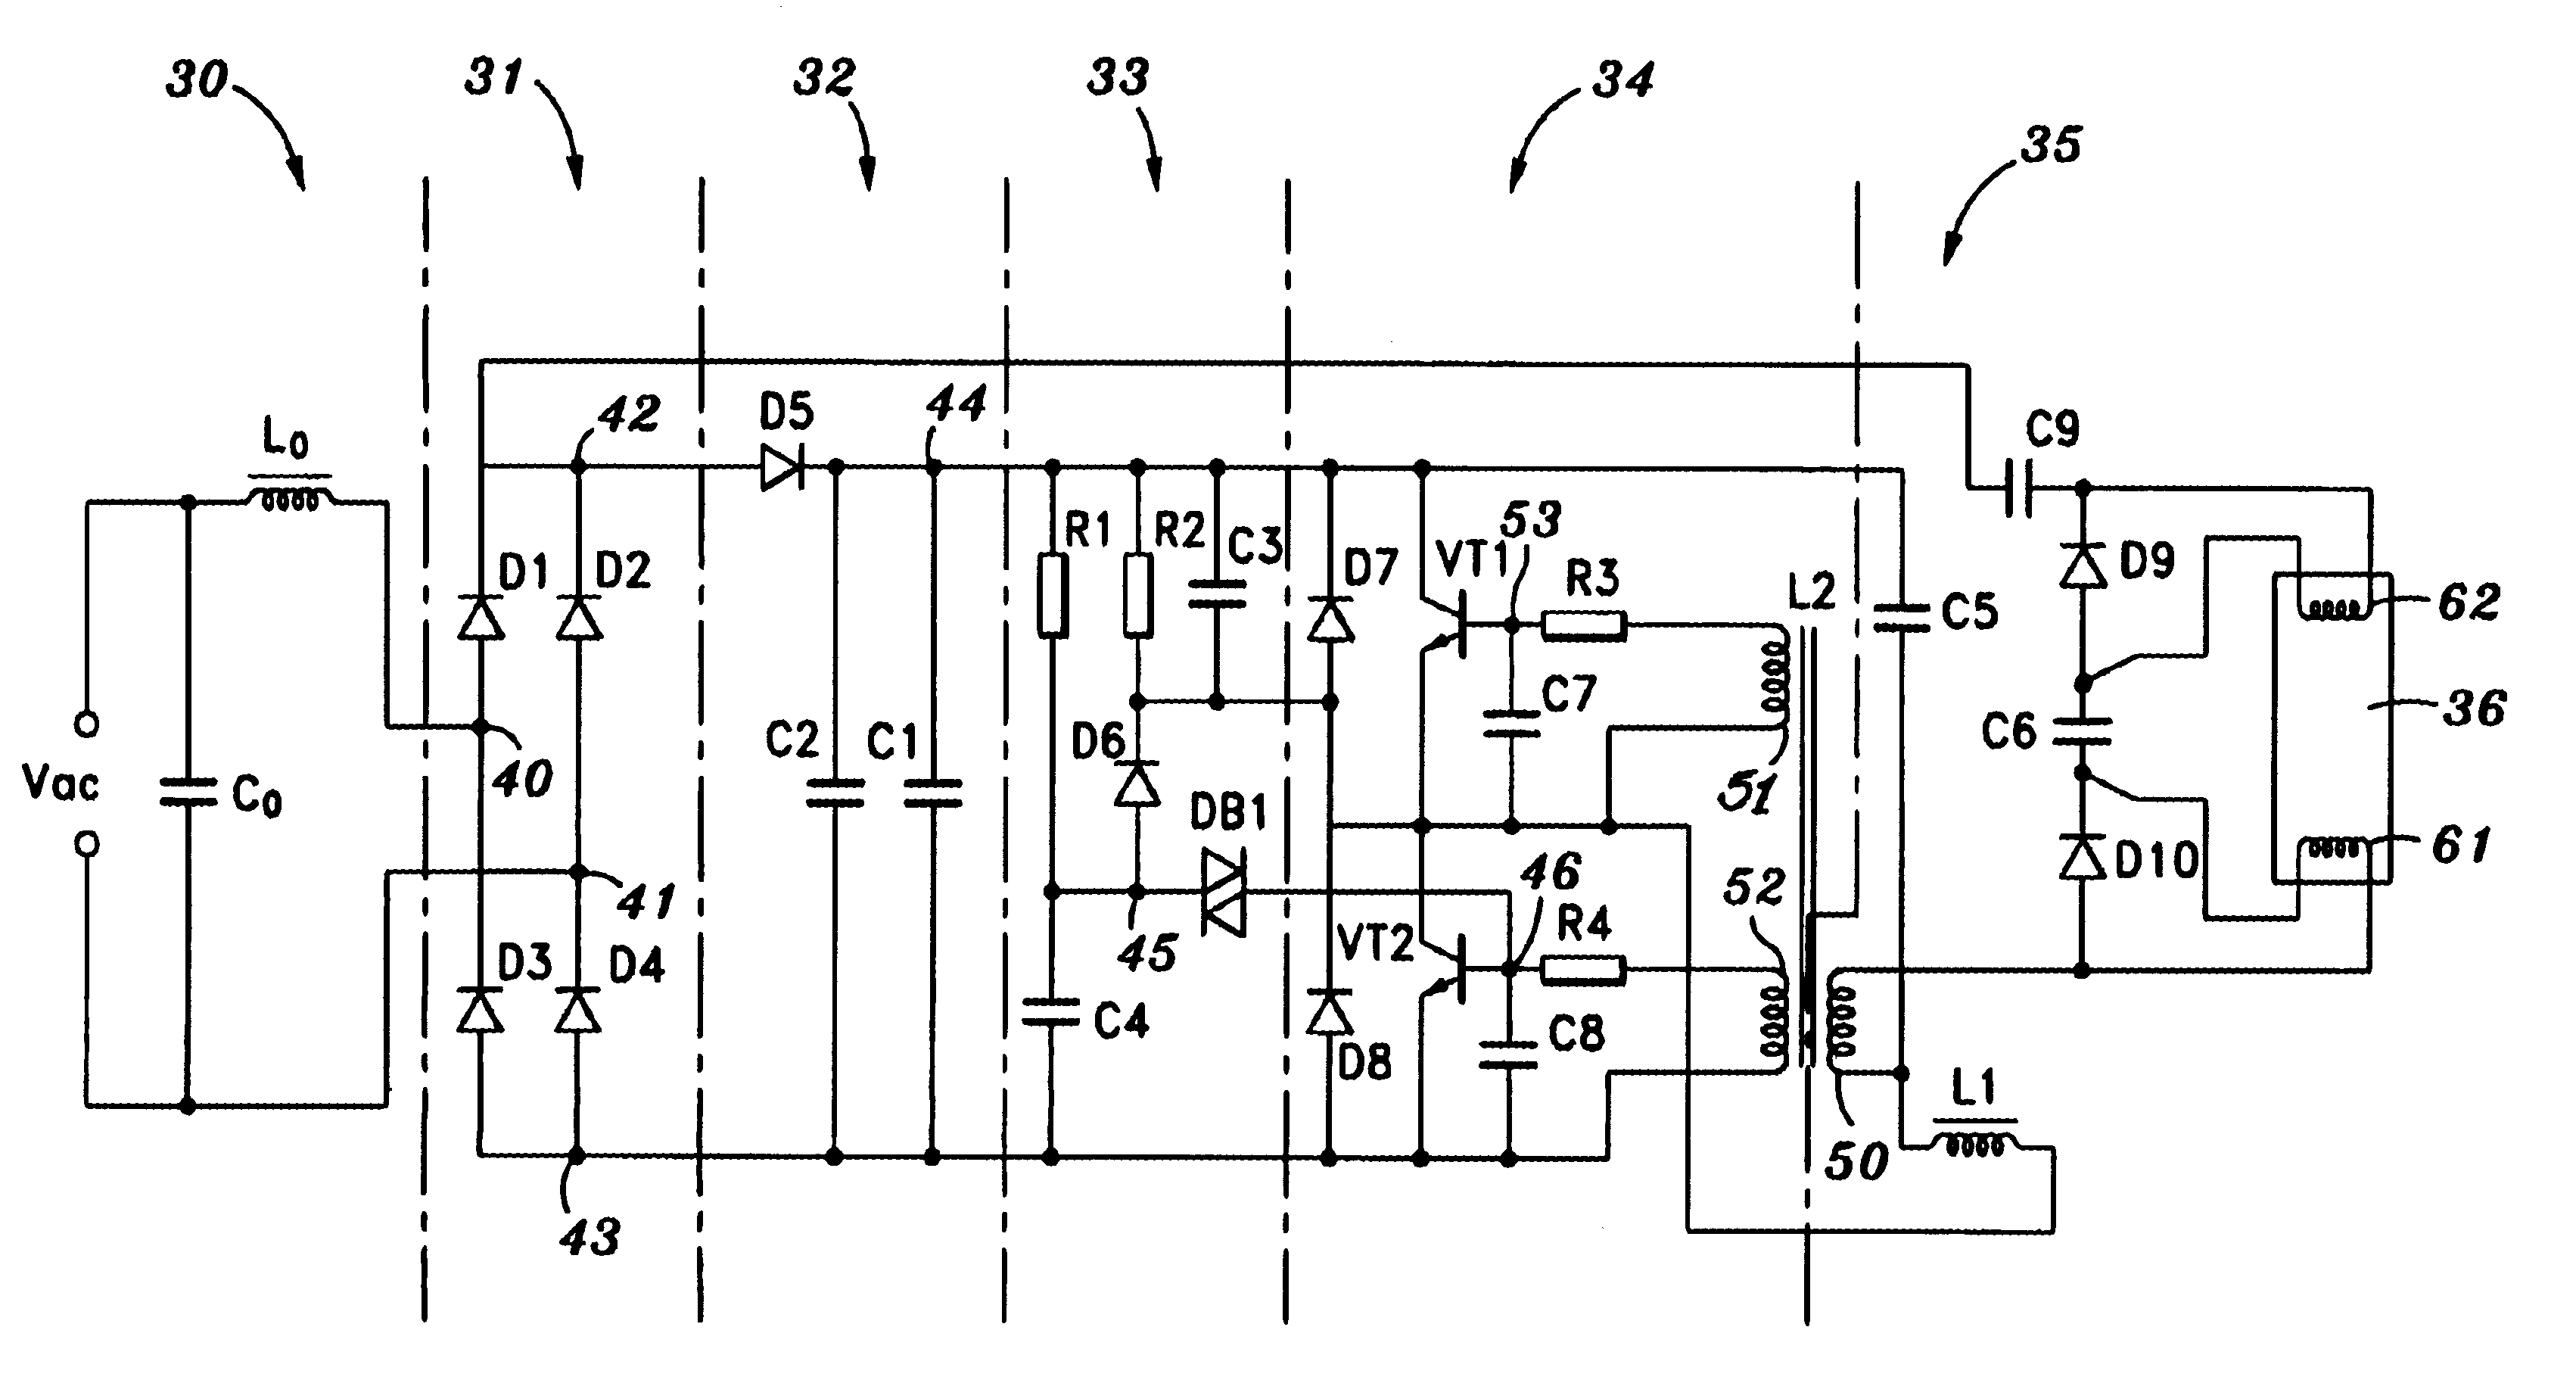 Control circuit for dimming fluorescent lamps